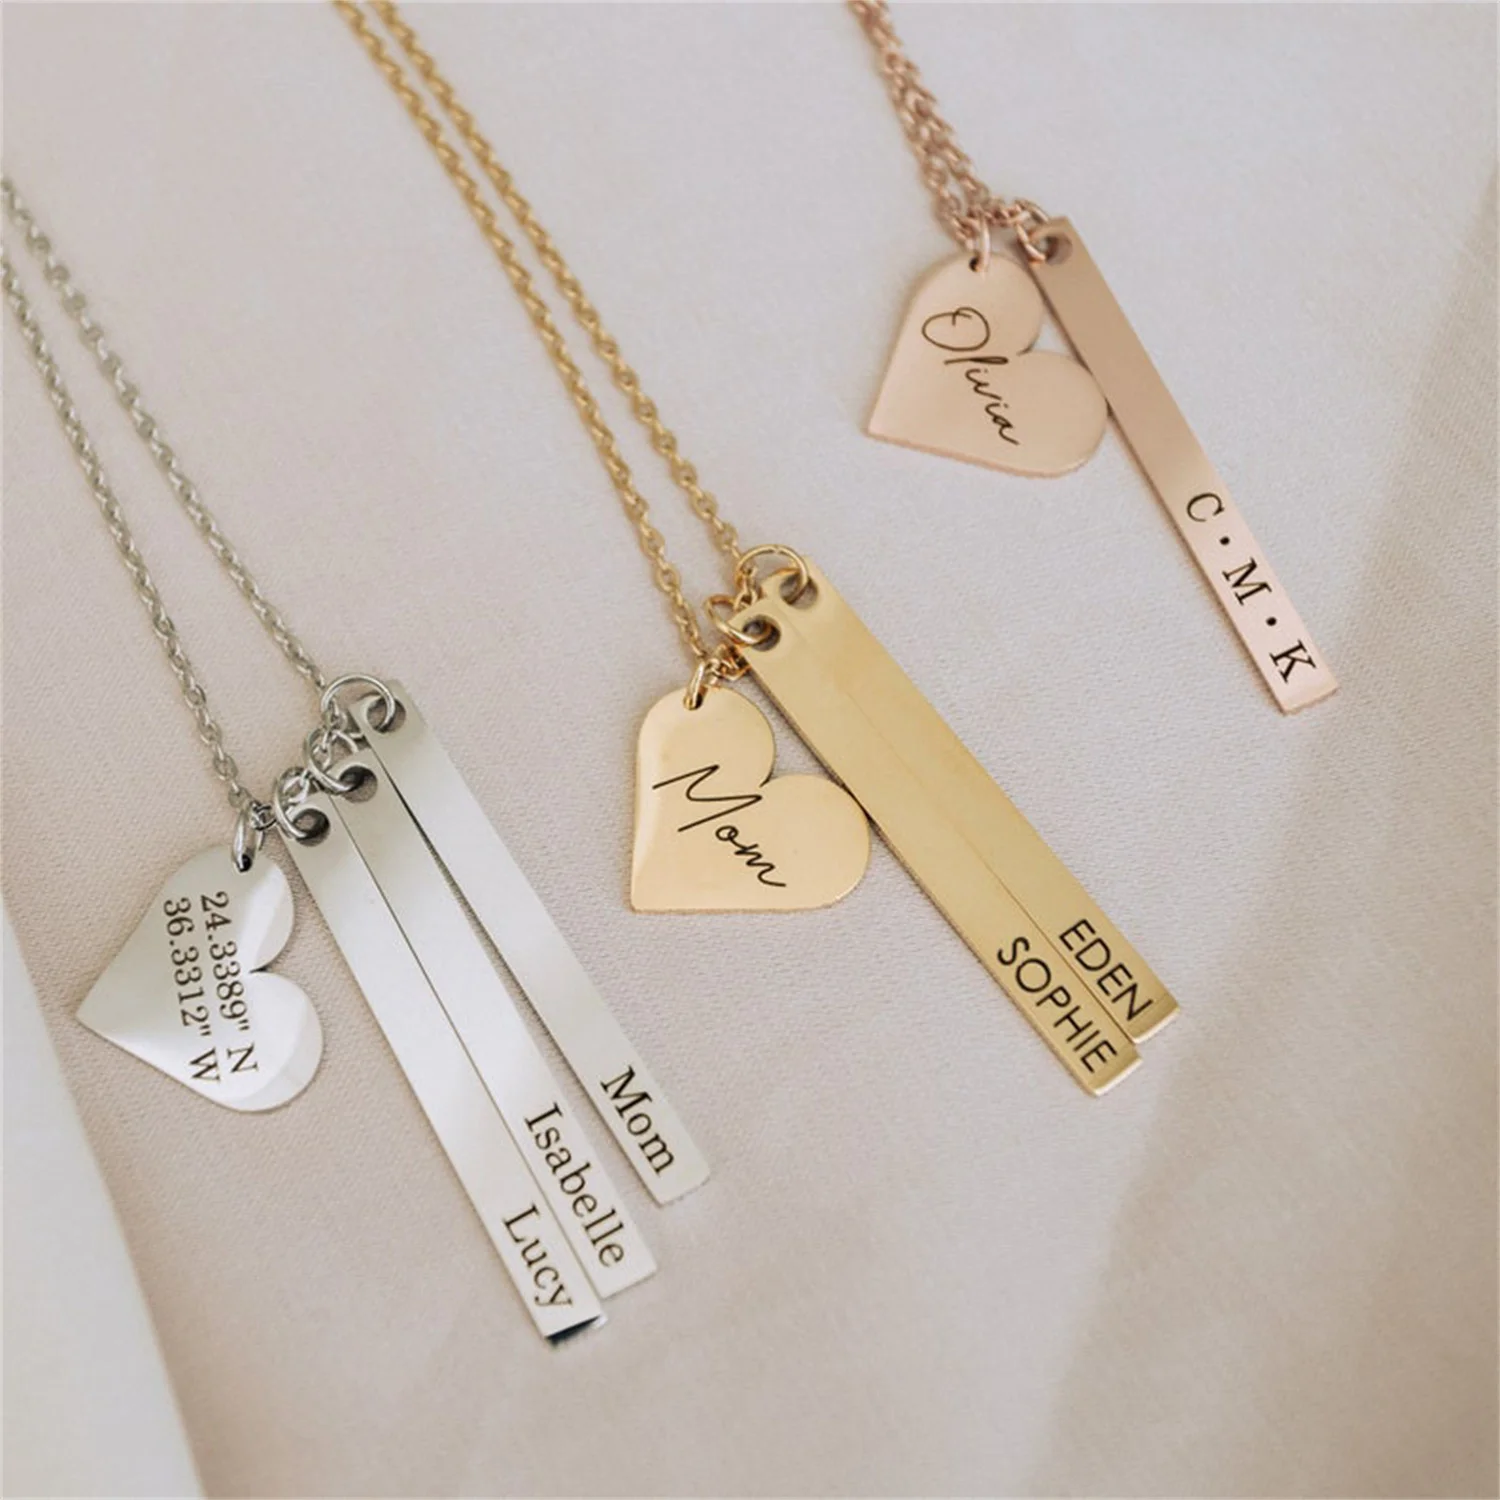 Personalized Engraved Name Bar Necklace Custom Heart Gold Charm Pendant Stainless Steel Jewelry Exquisite Gift For Family Friend custom engravd name id bracelet for women stainless steel jewelry beads charm personnalisé bangle family lovers anniversary gift